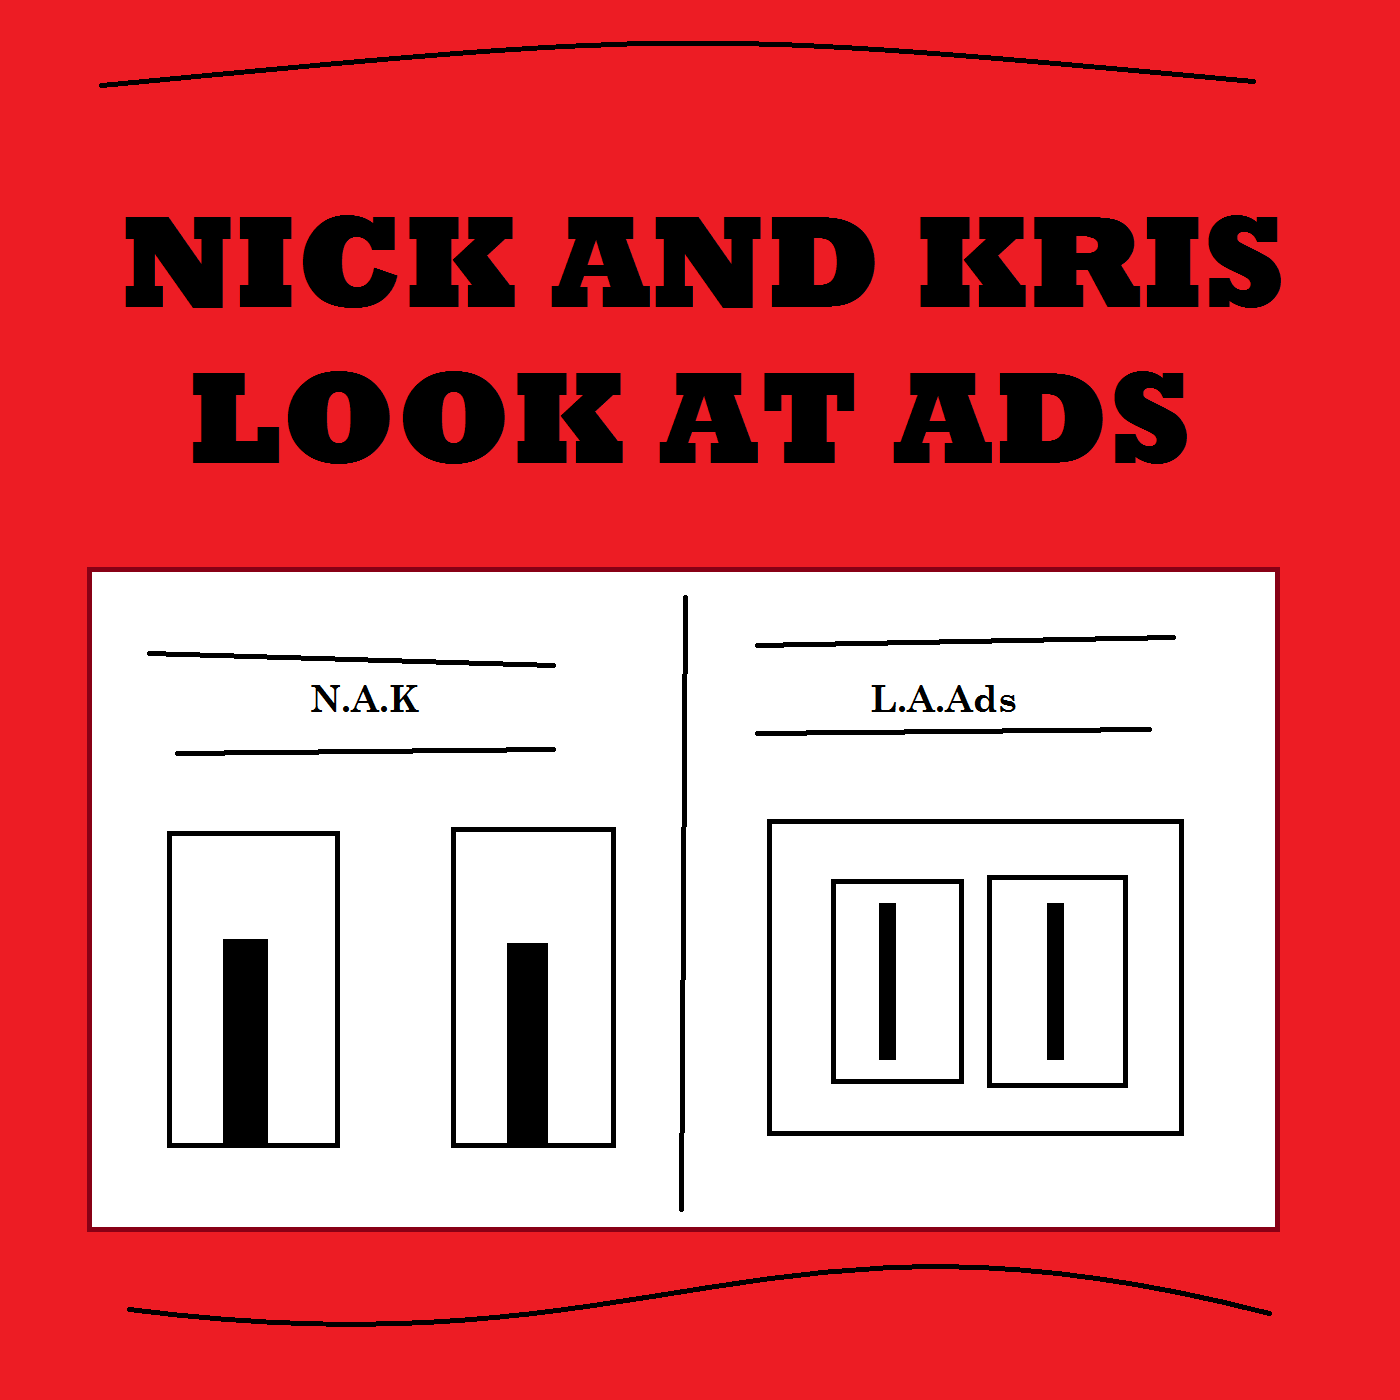 Nick and Kris Look at Ads